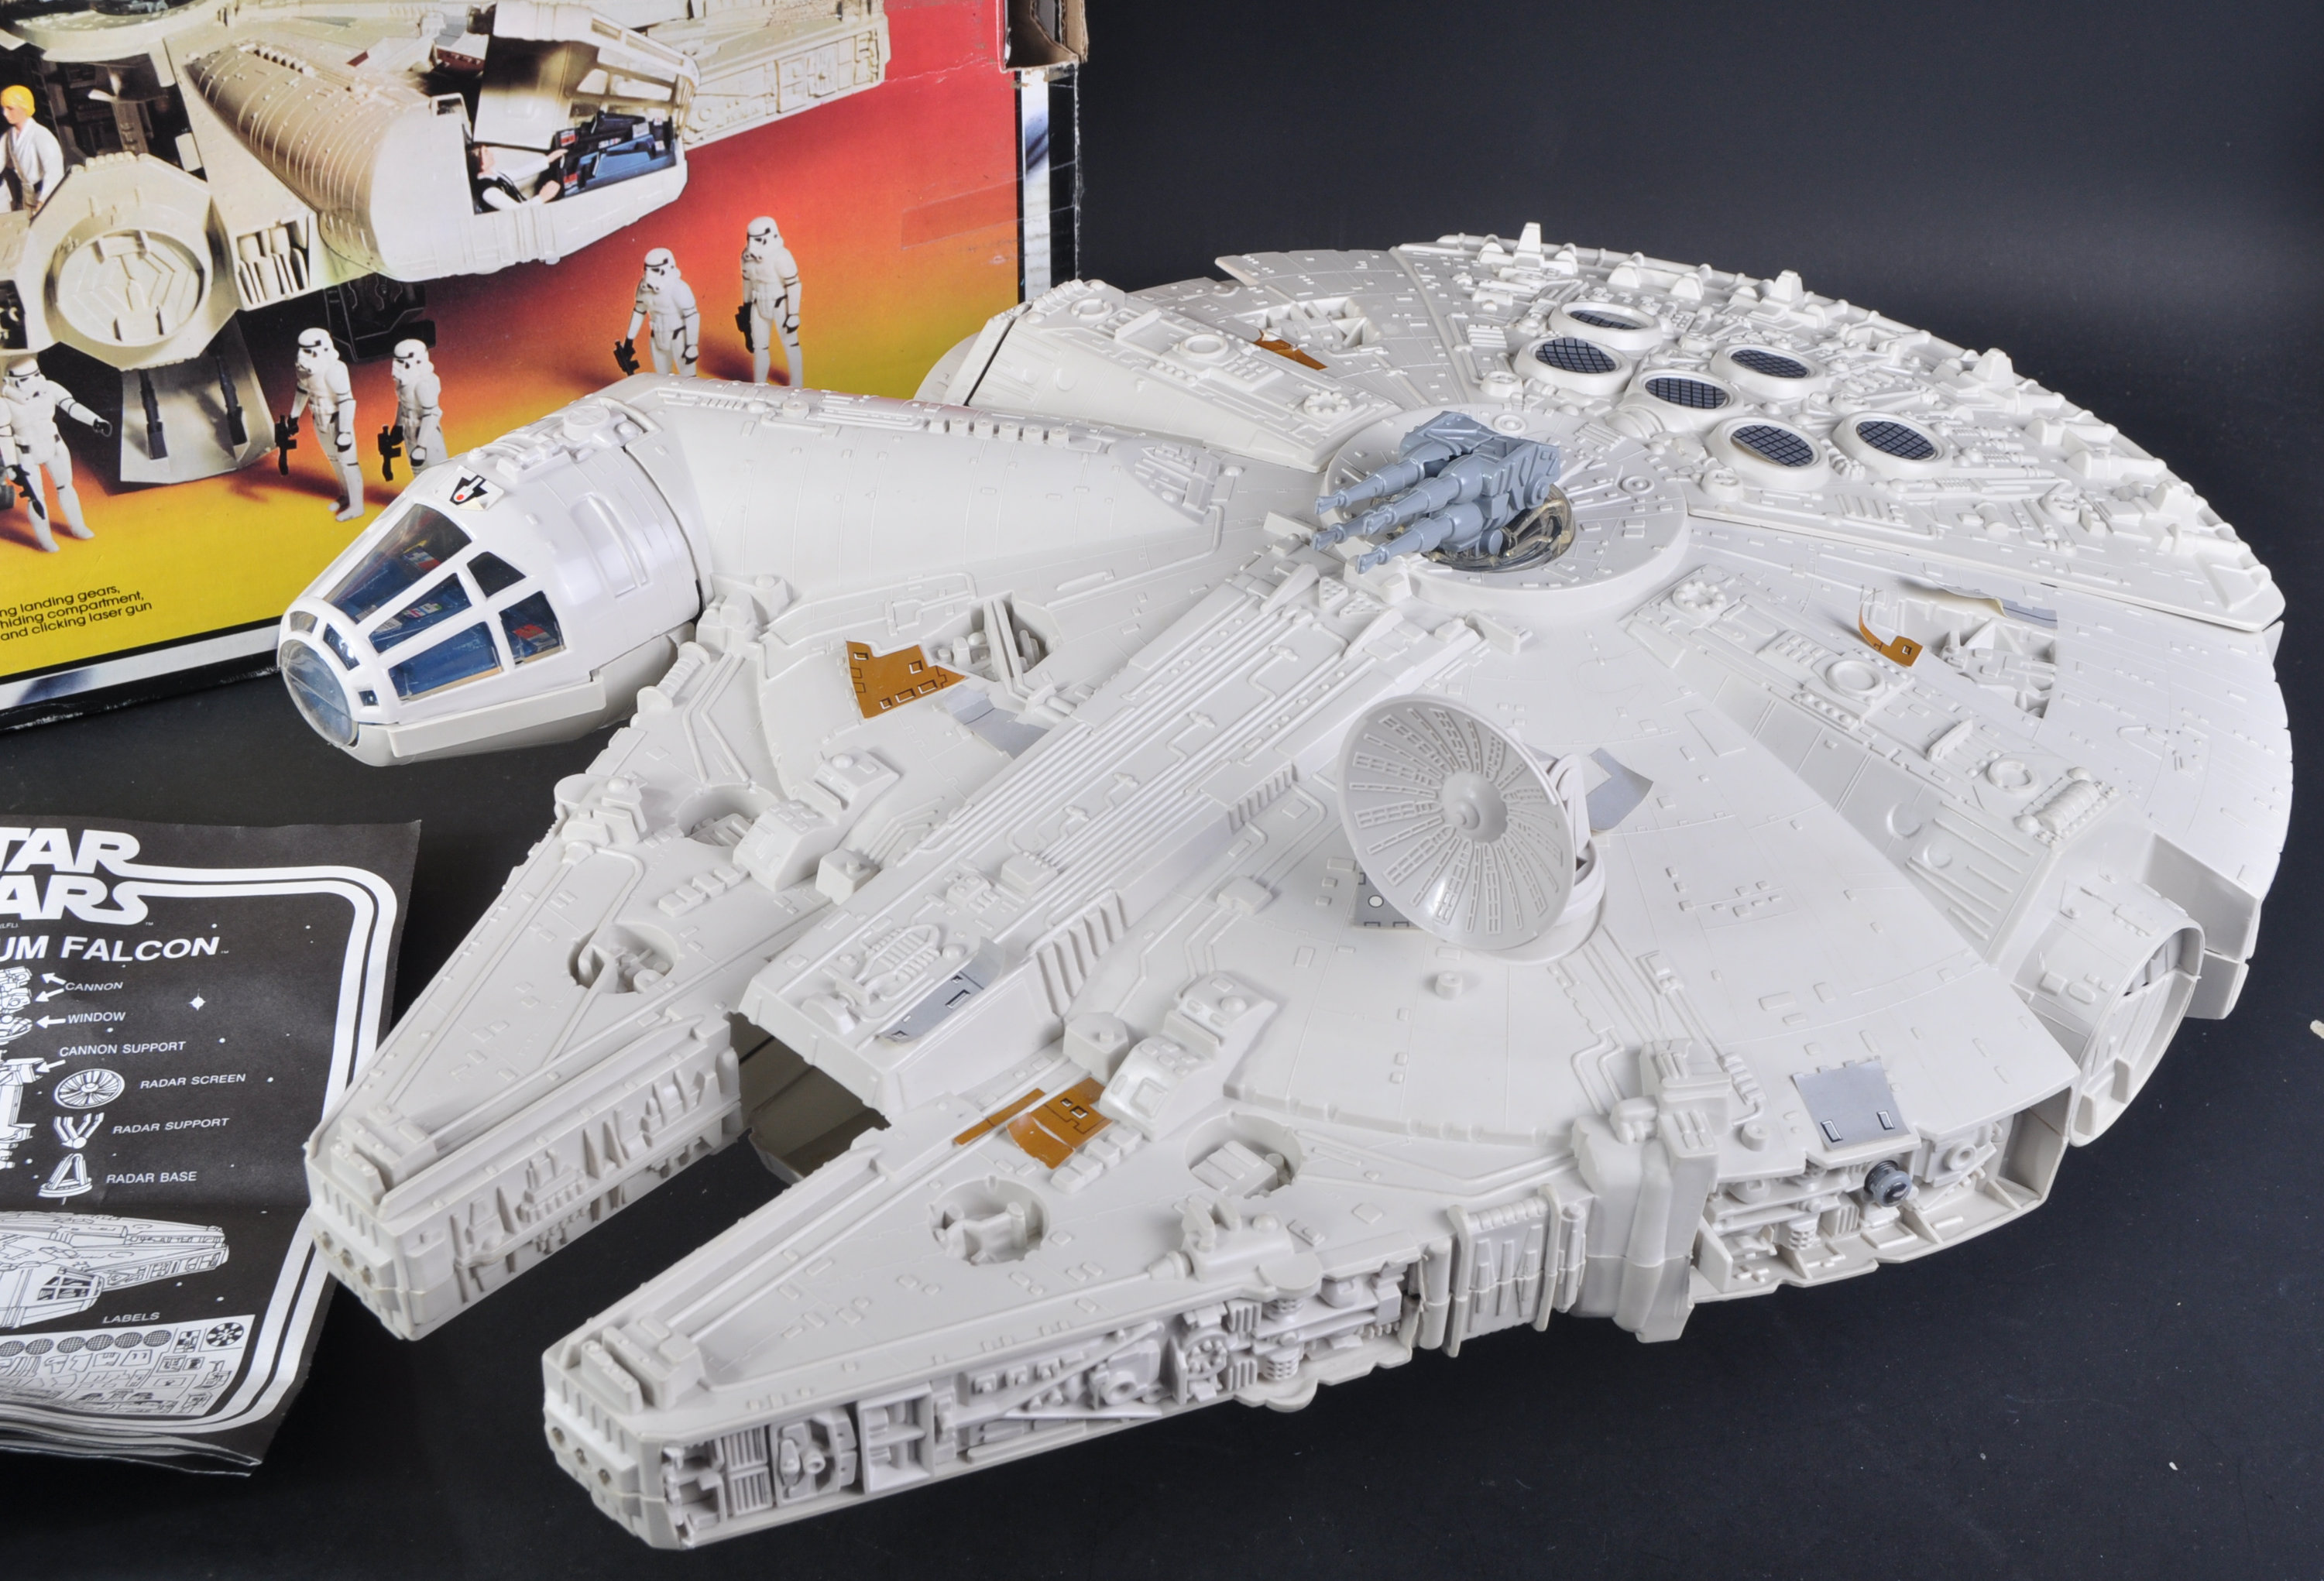 STAR WARS - EMPIRE STRIKES BACK PALITOY MILLENNIUM FALCON PLAYSET - Image 2 of 10